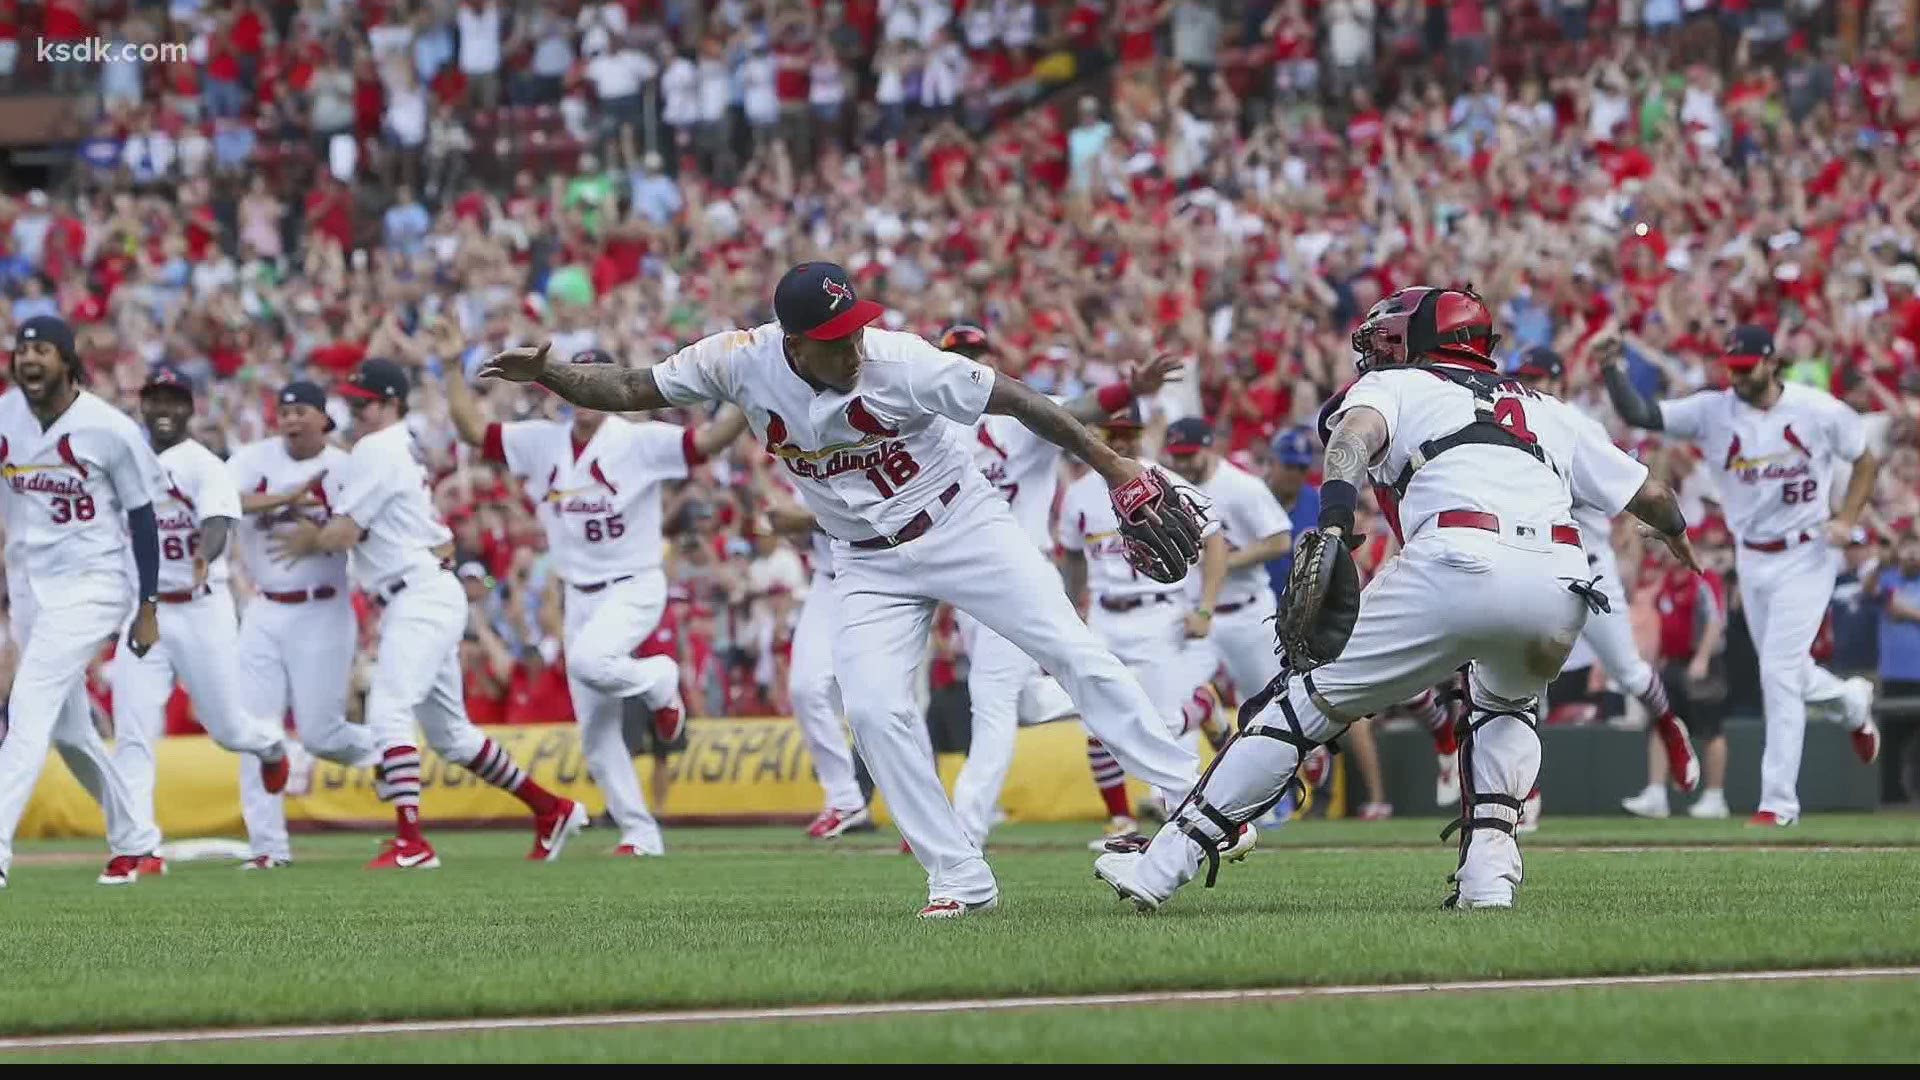 This baseball season will be unlike any we've ever seen. The Cardinals have a leg up in some areas.